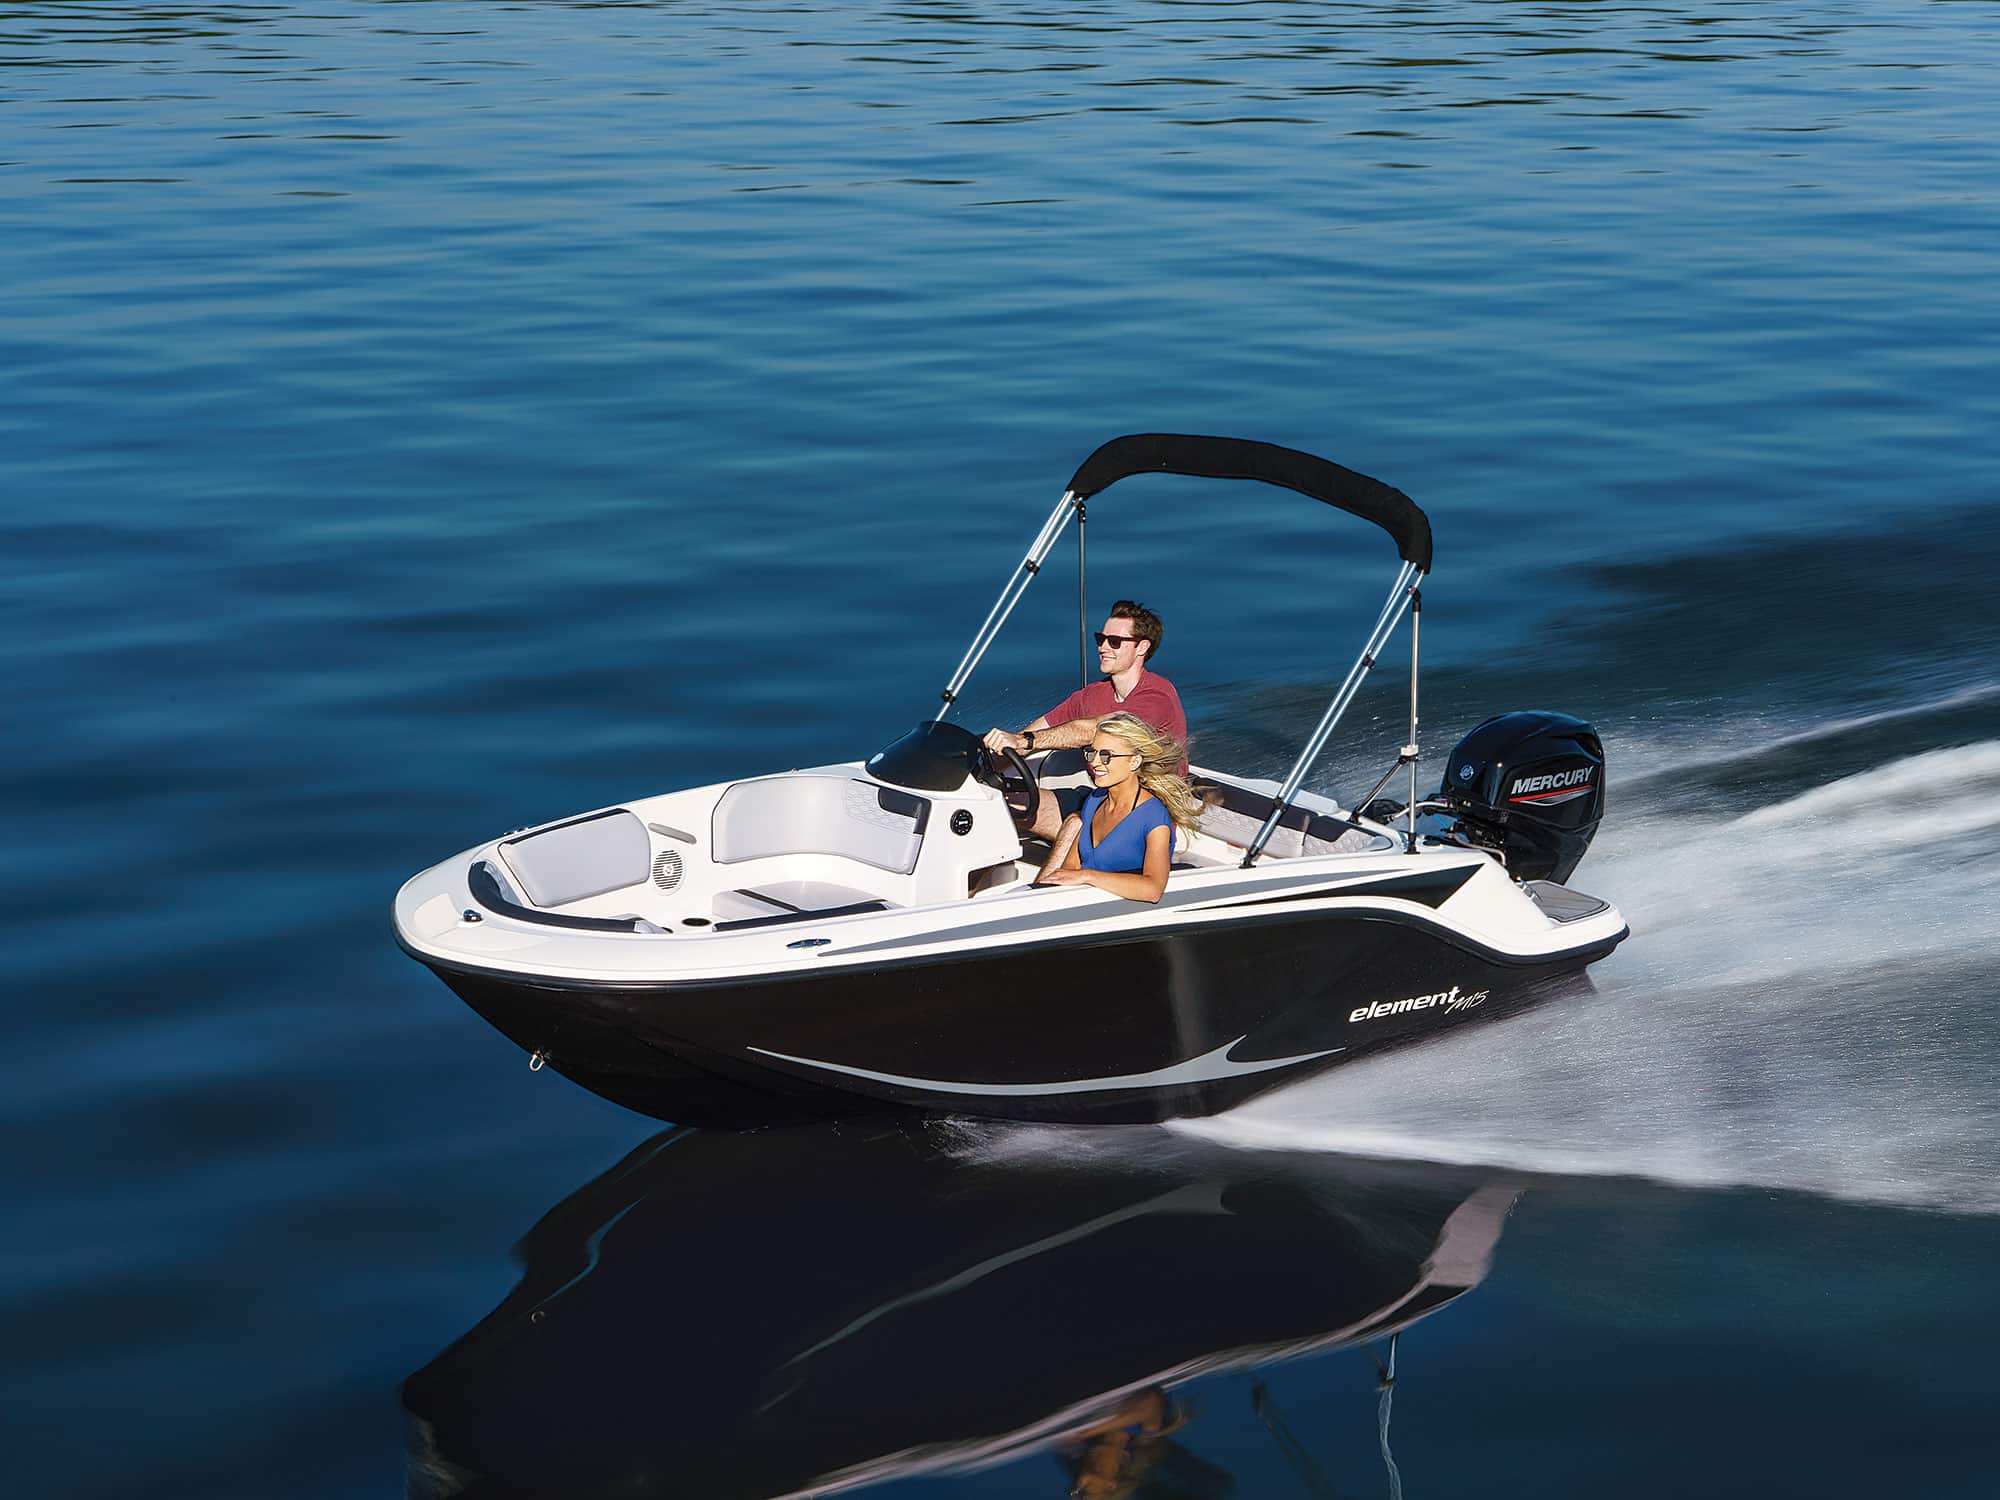 Get in Gear: 16 Cool Boat Gadgets You Never Knew You Needed – Better Boat